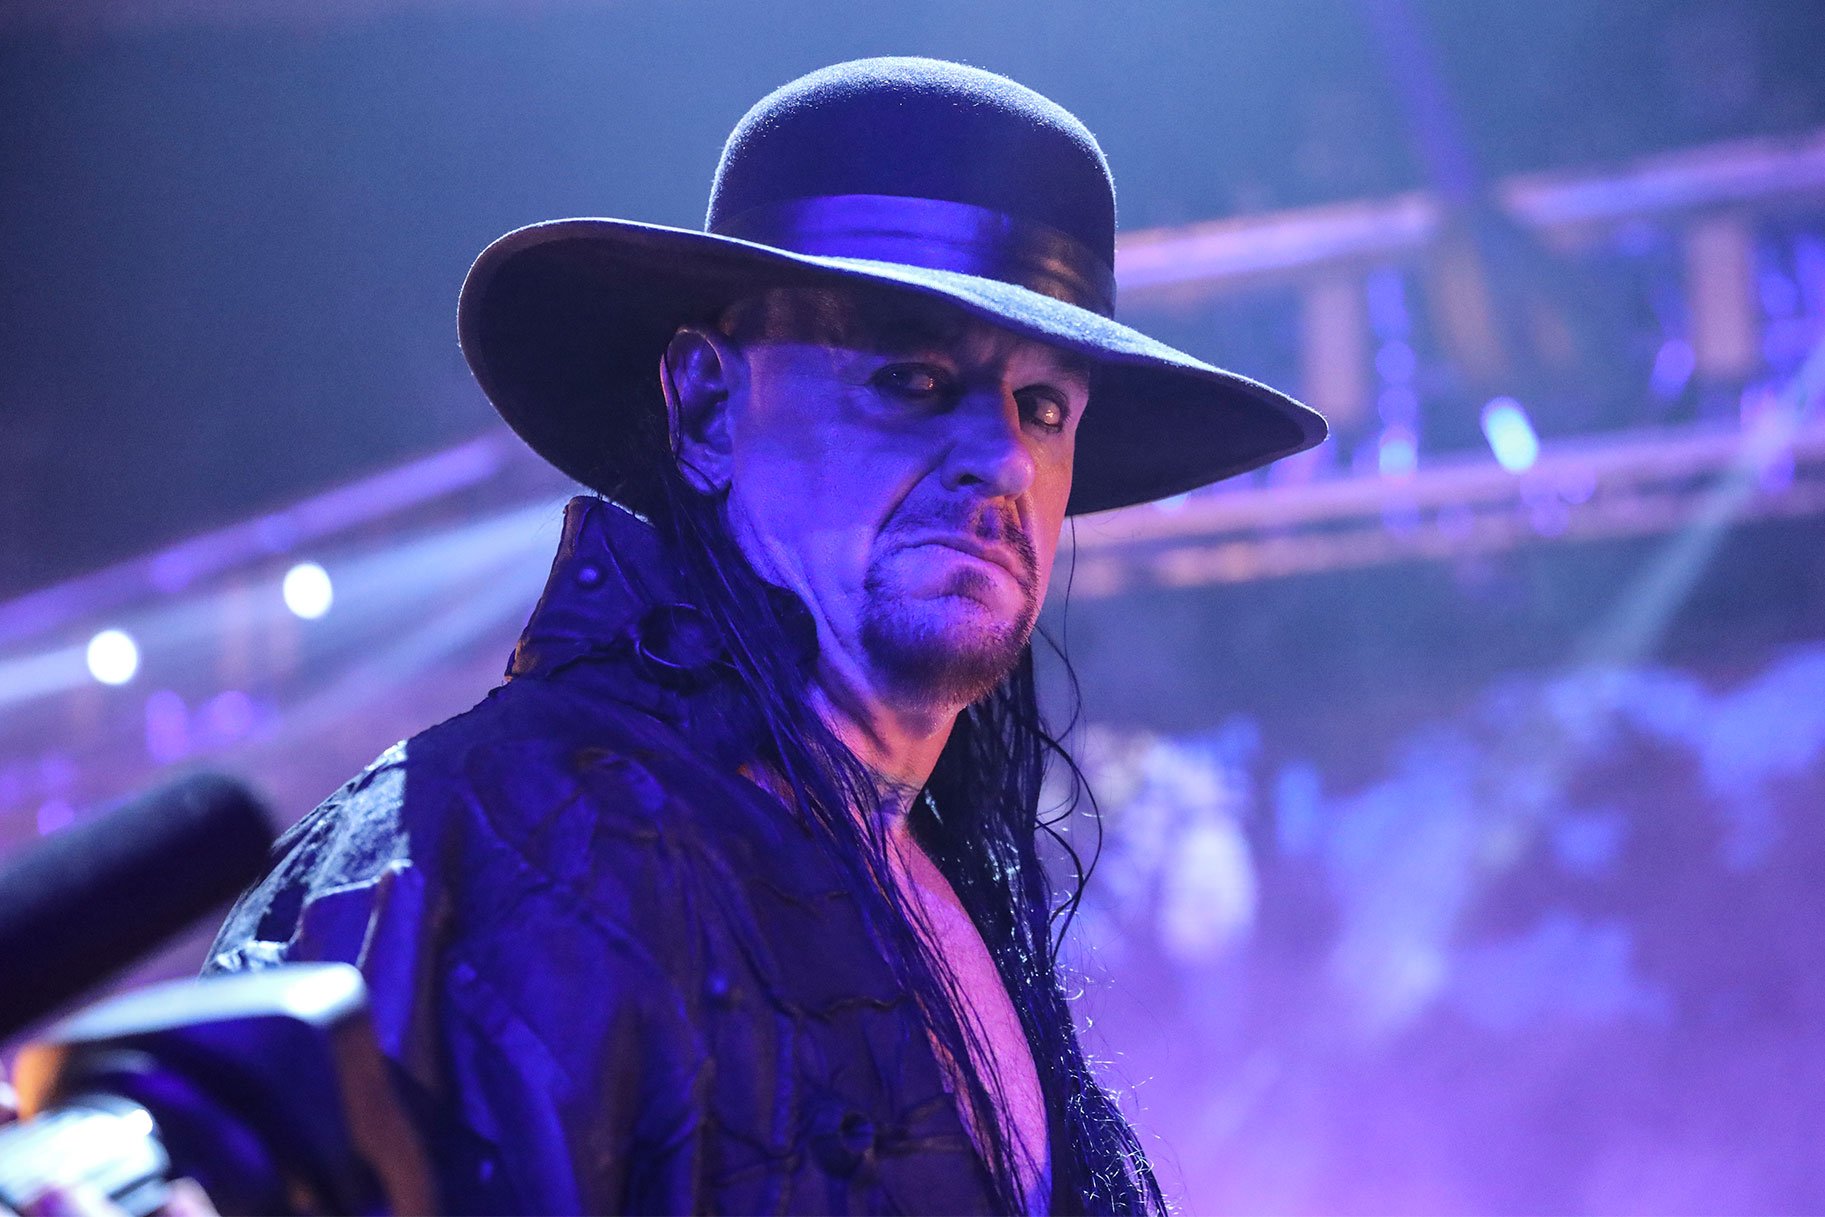 The Undertaker: “Maintaining The Character in Today’s Era Would Be Quite The Challenge”